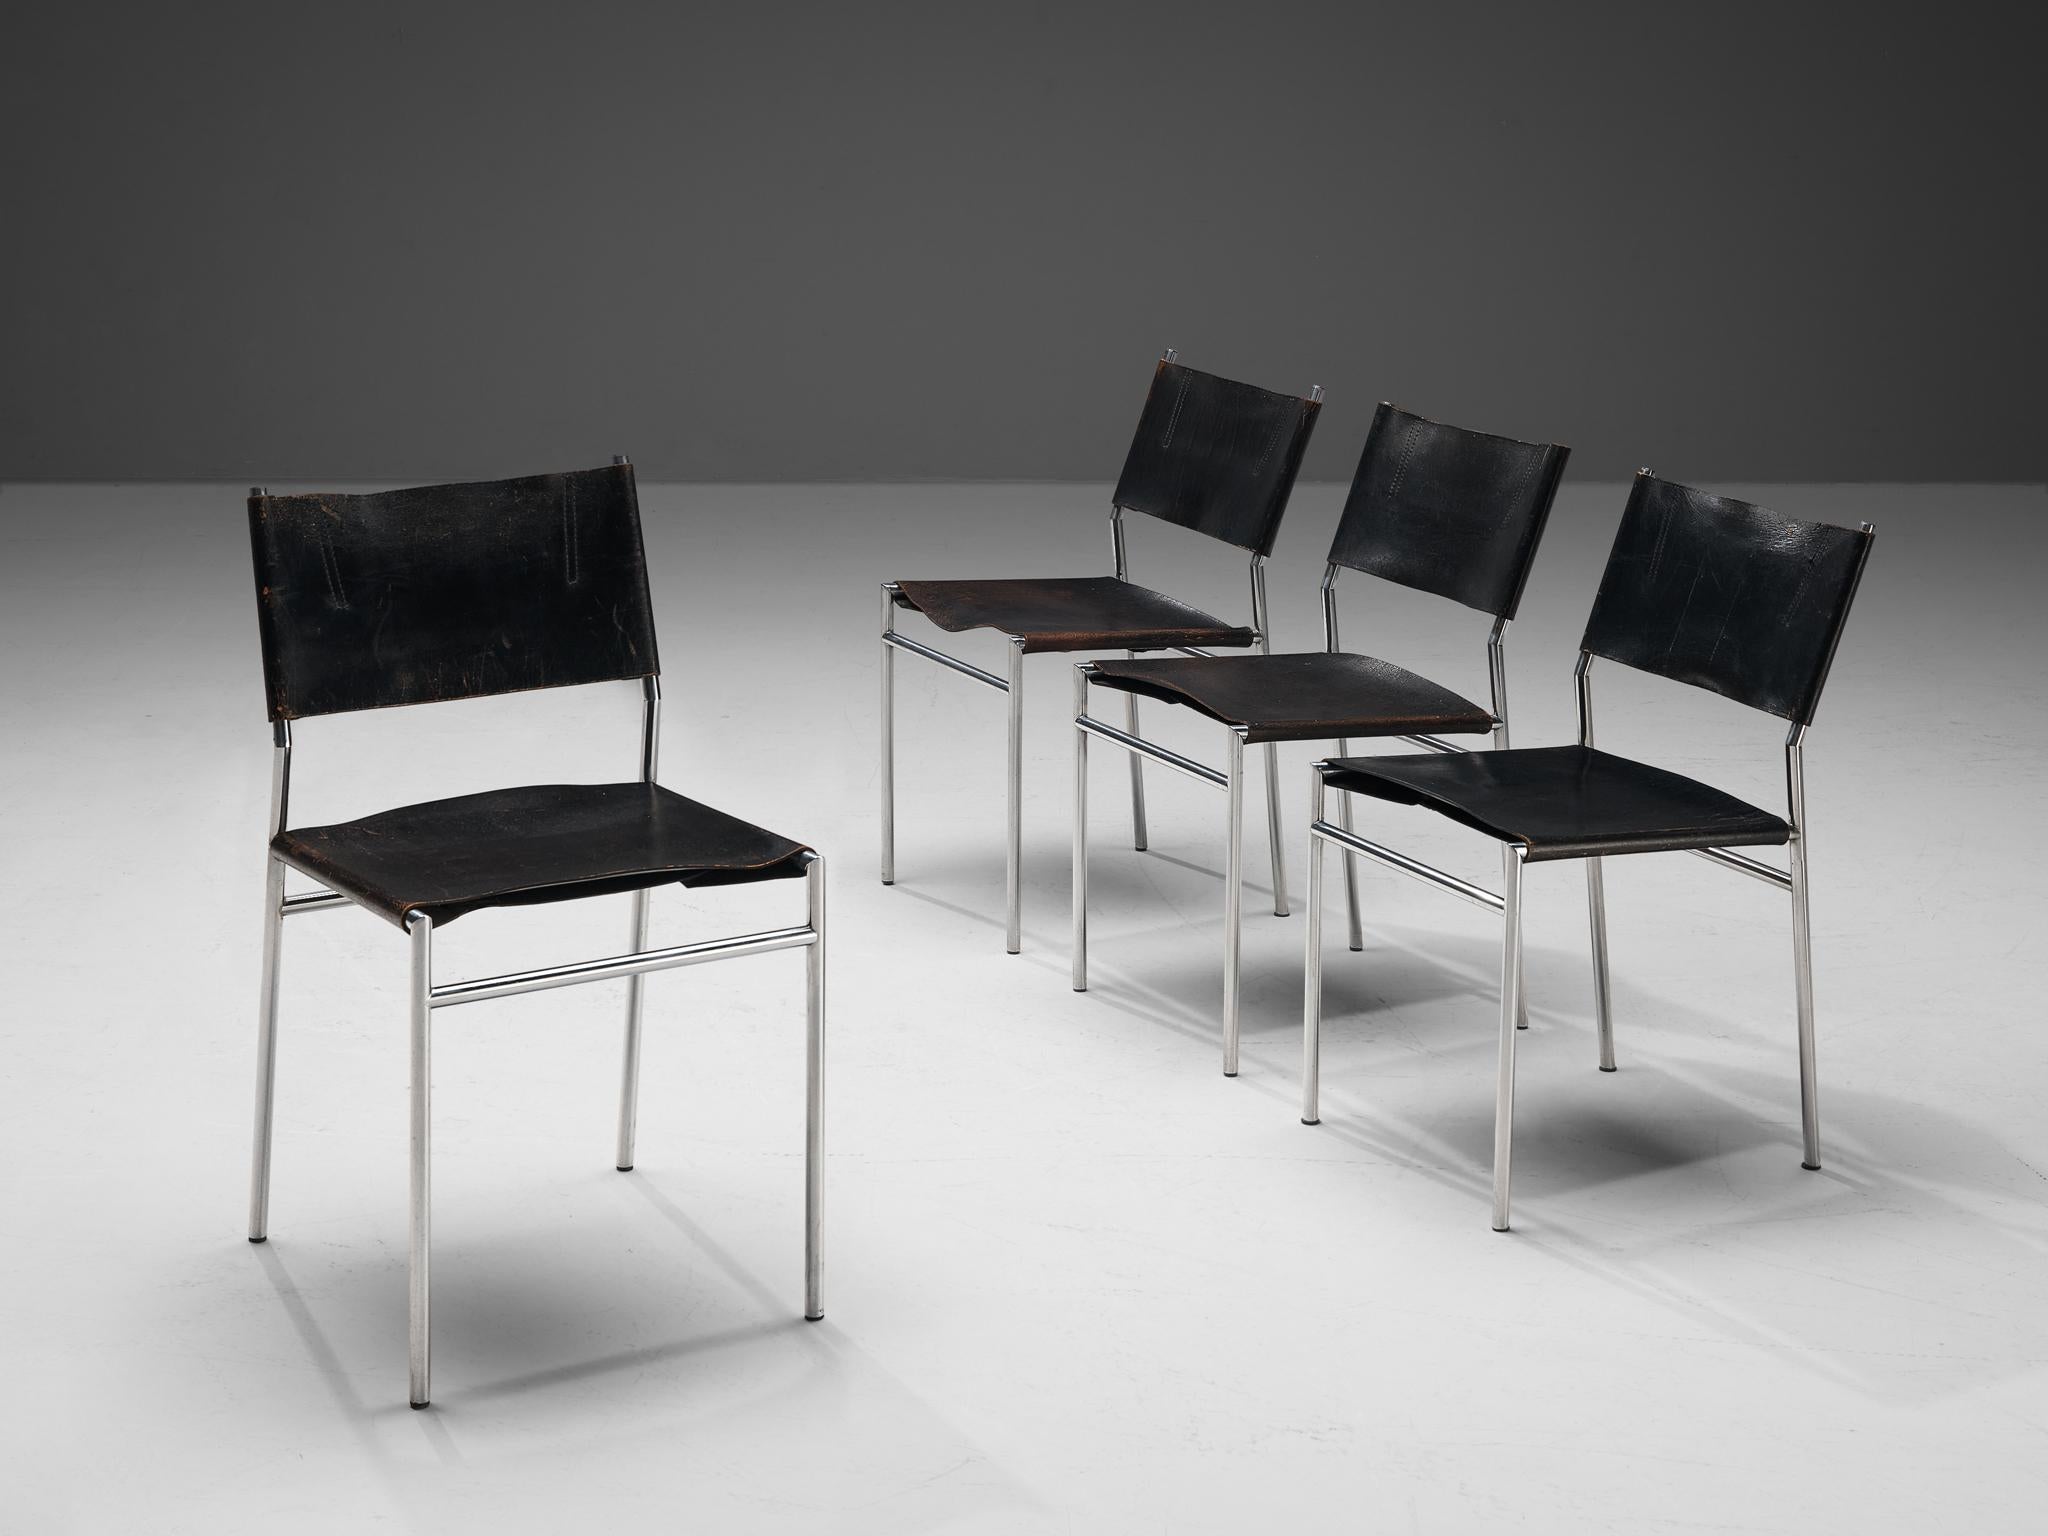 Martin Visser for 't Spectrum, set of four dining room chairs, steel and leather, the Netherlands, 1960s. 

The designs of Martin Visser are characterized by clear lines and the use of metal in combination with natural materials like leather or